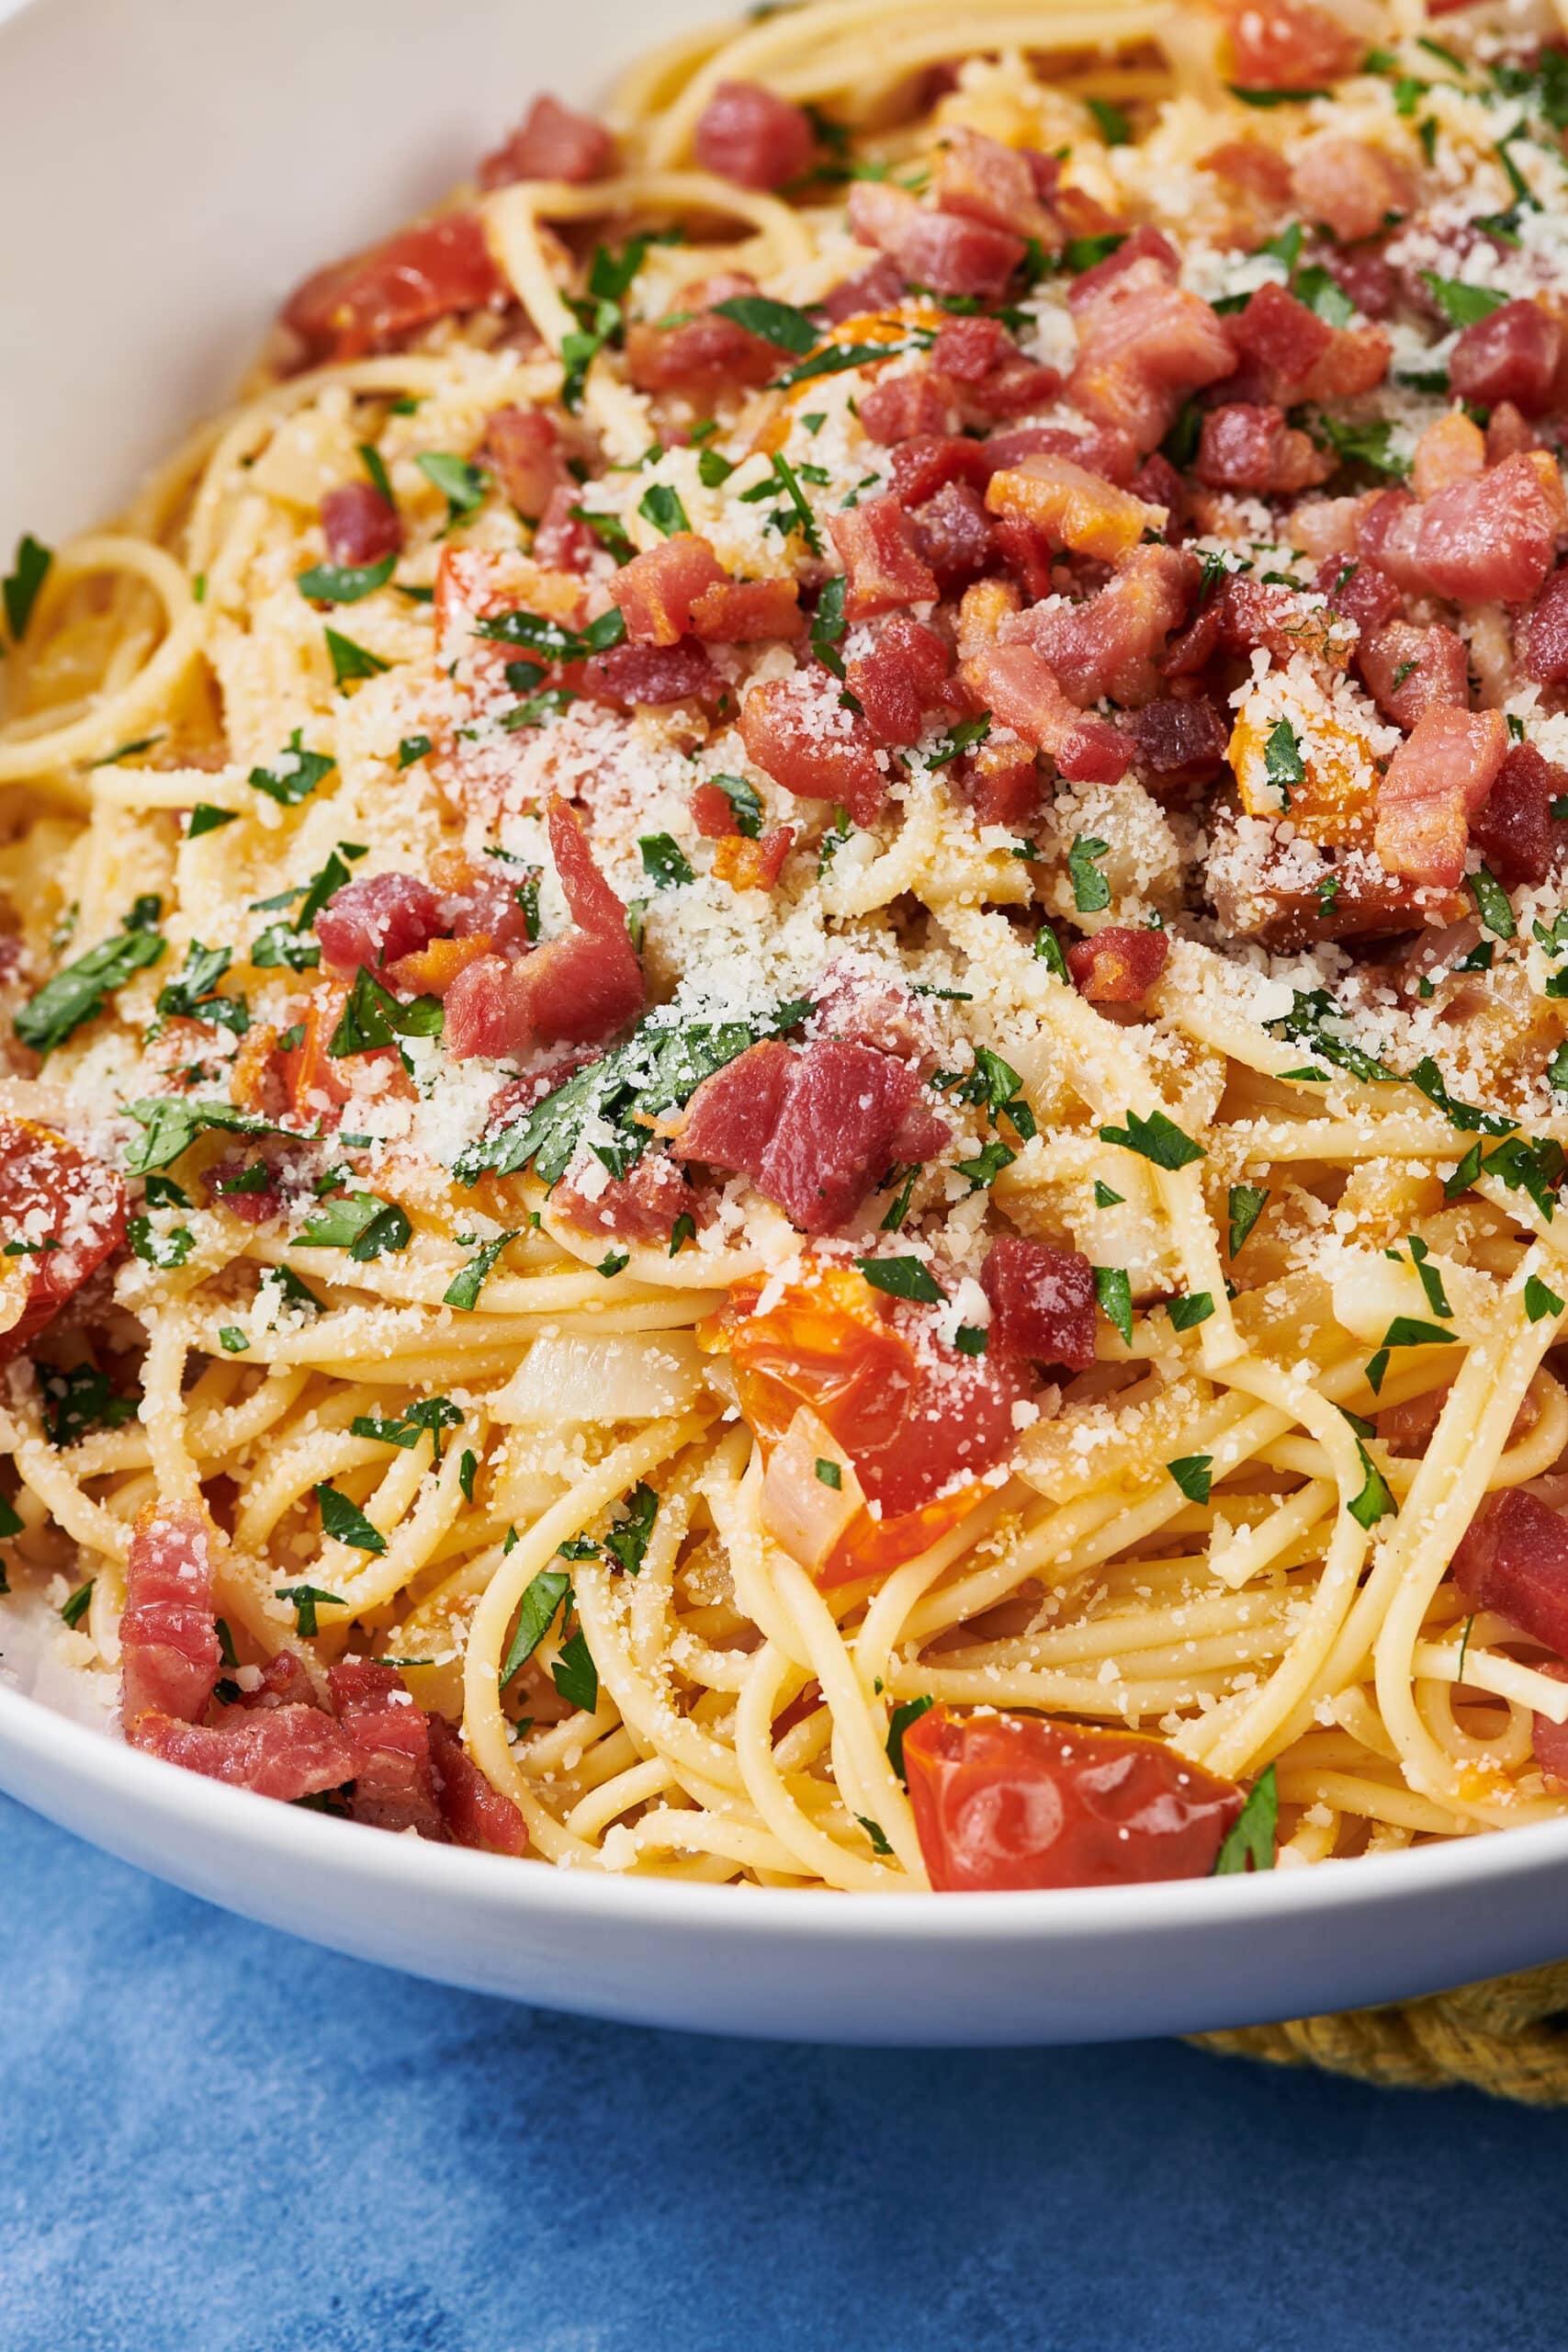 Serving dish of Pancetta Pasta with Tomatoes.